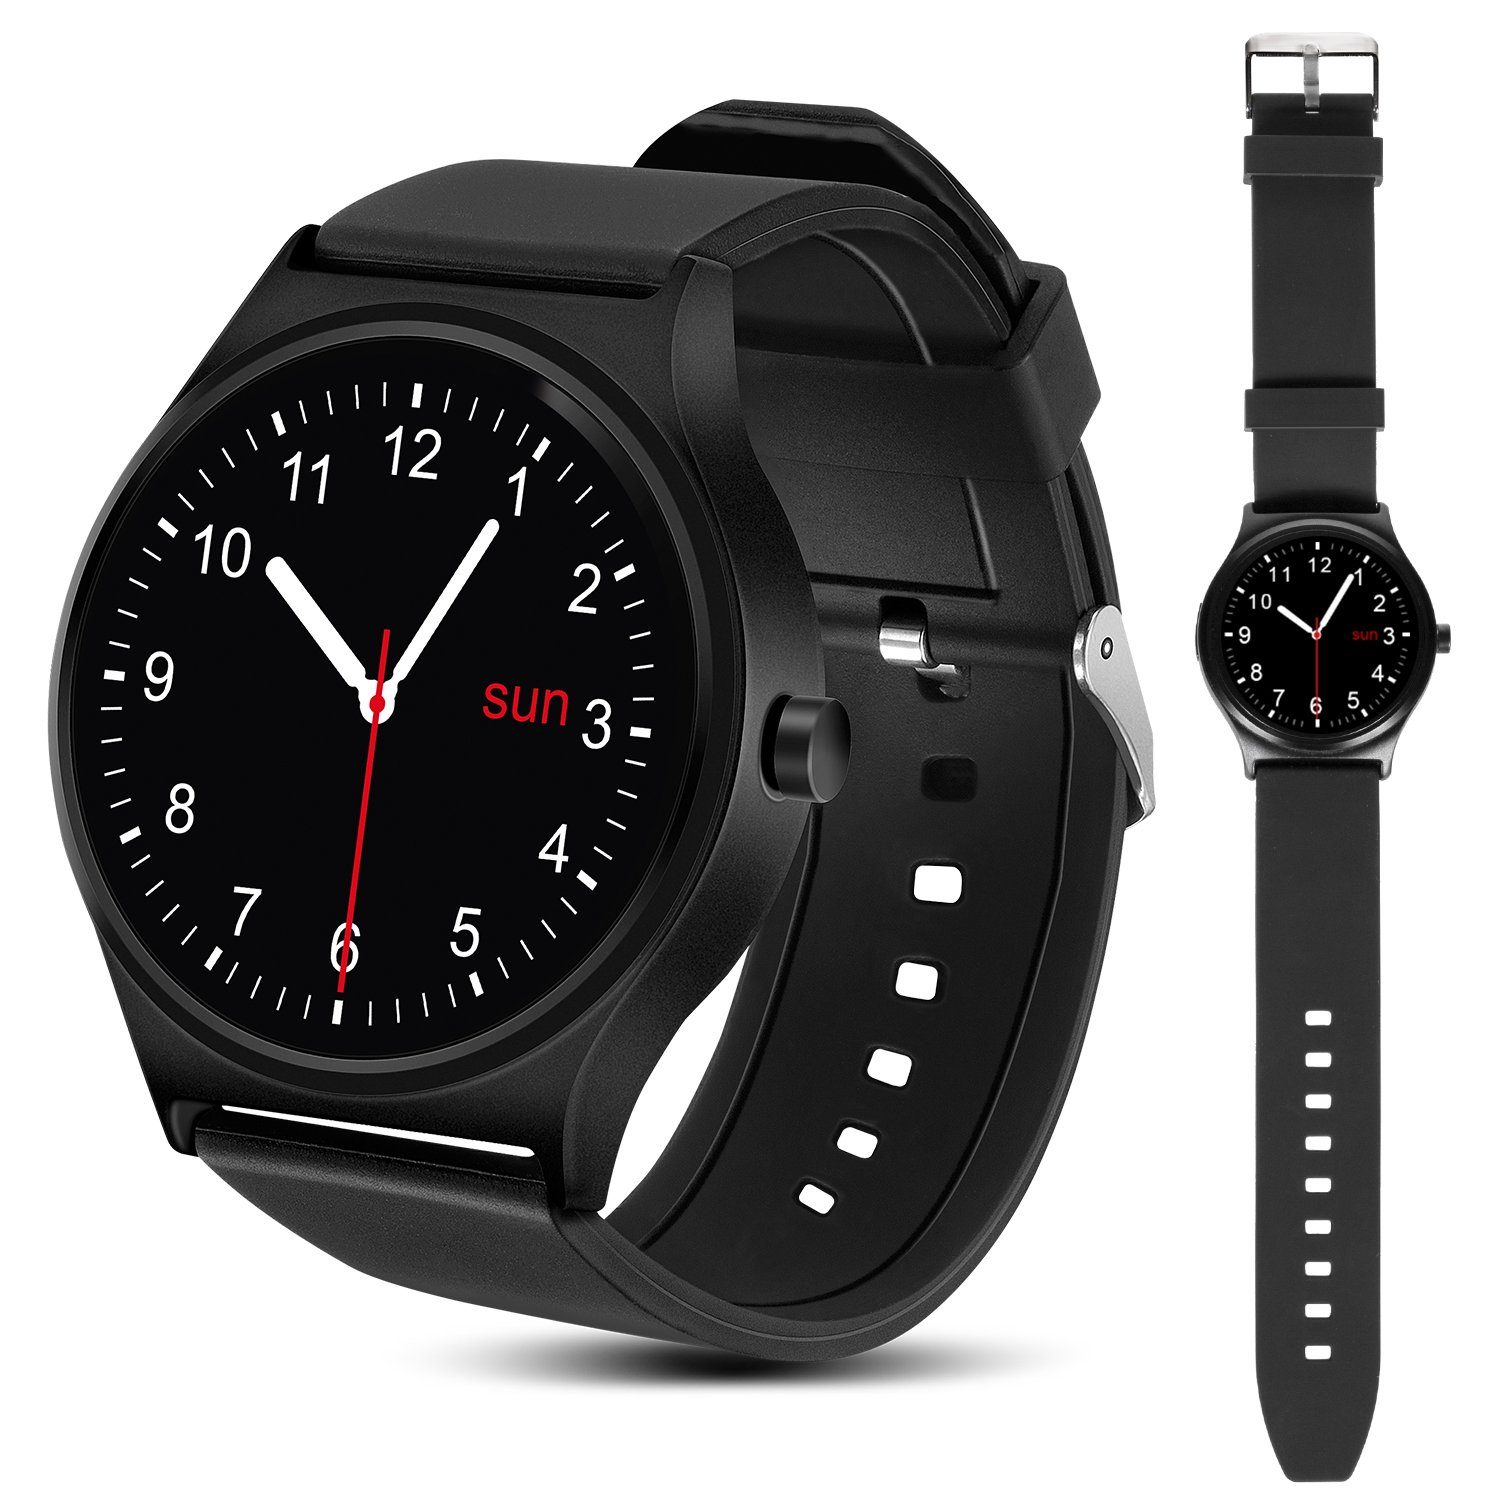 NanoRS RS100 Smartwatch (1,3 Zoll), Touchscreen; Bluetooth 4.0; Anrufe/SMS/Social Media